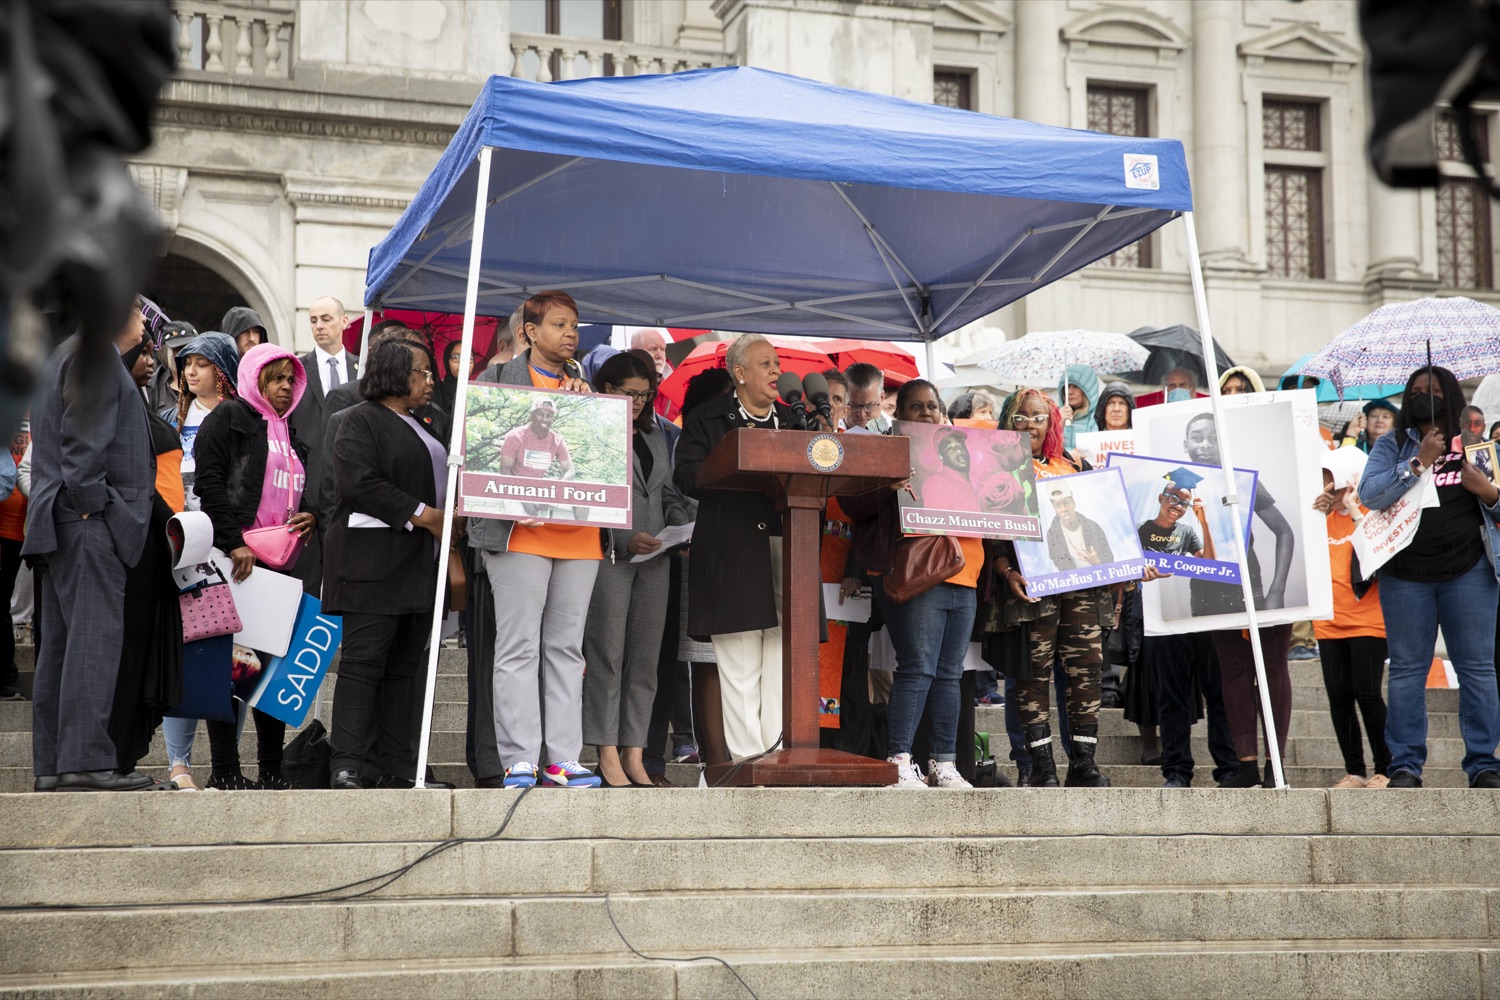 Wanda Williams, Mayor of Harrisburg, who lost a granddaughter to gun violence, calls for legislative action to save lives against gun violence, in Harrisburg, PA on April 26, 2022.<br><a href="https://filesource.amperwave.net/commonwealthofpa/photo/20782_gov_ceaseFirePA_07.JPG" target="_blank">⇣ Download Photo</a>